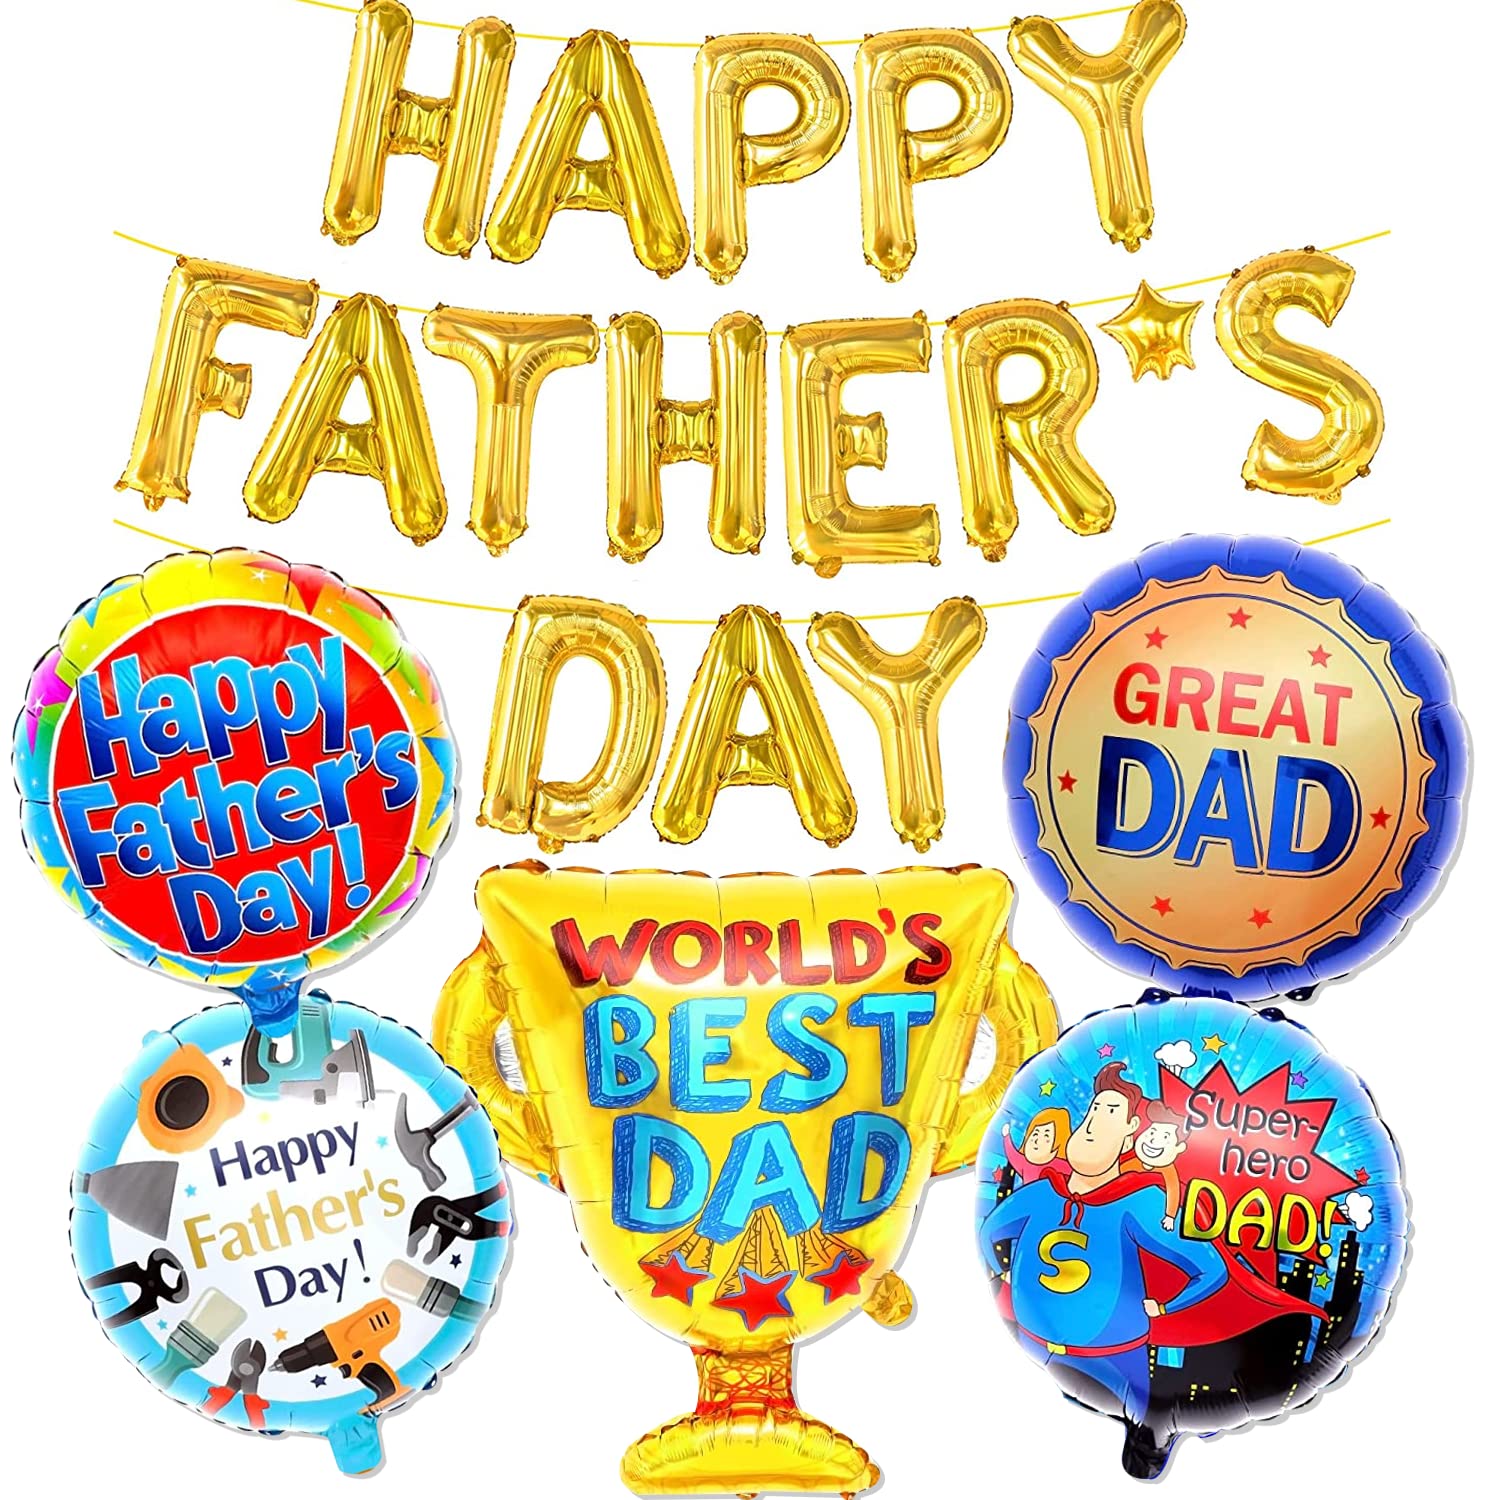 A group of colorful balloons with Happy Father's Day written on them.